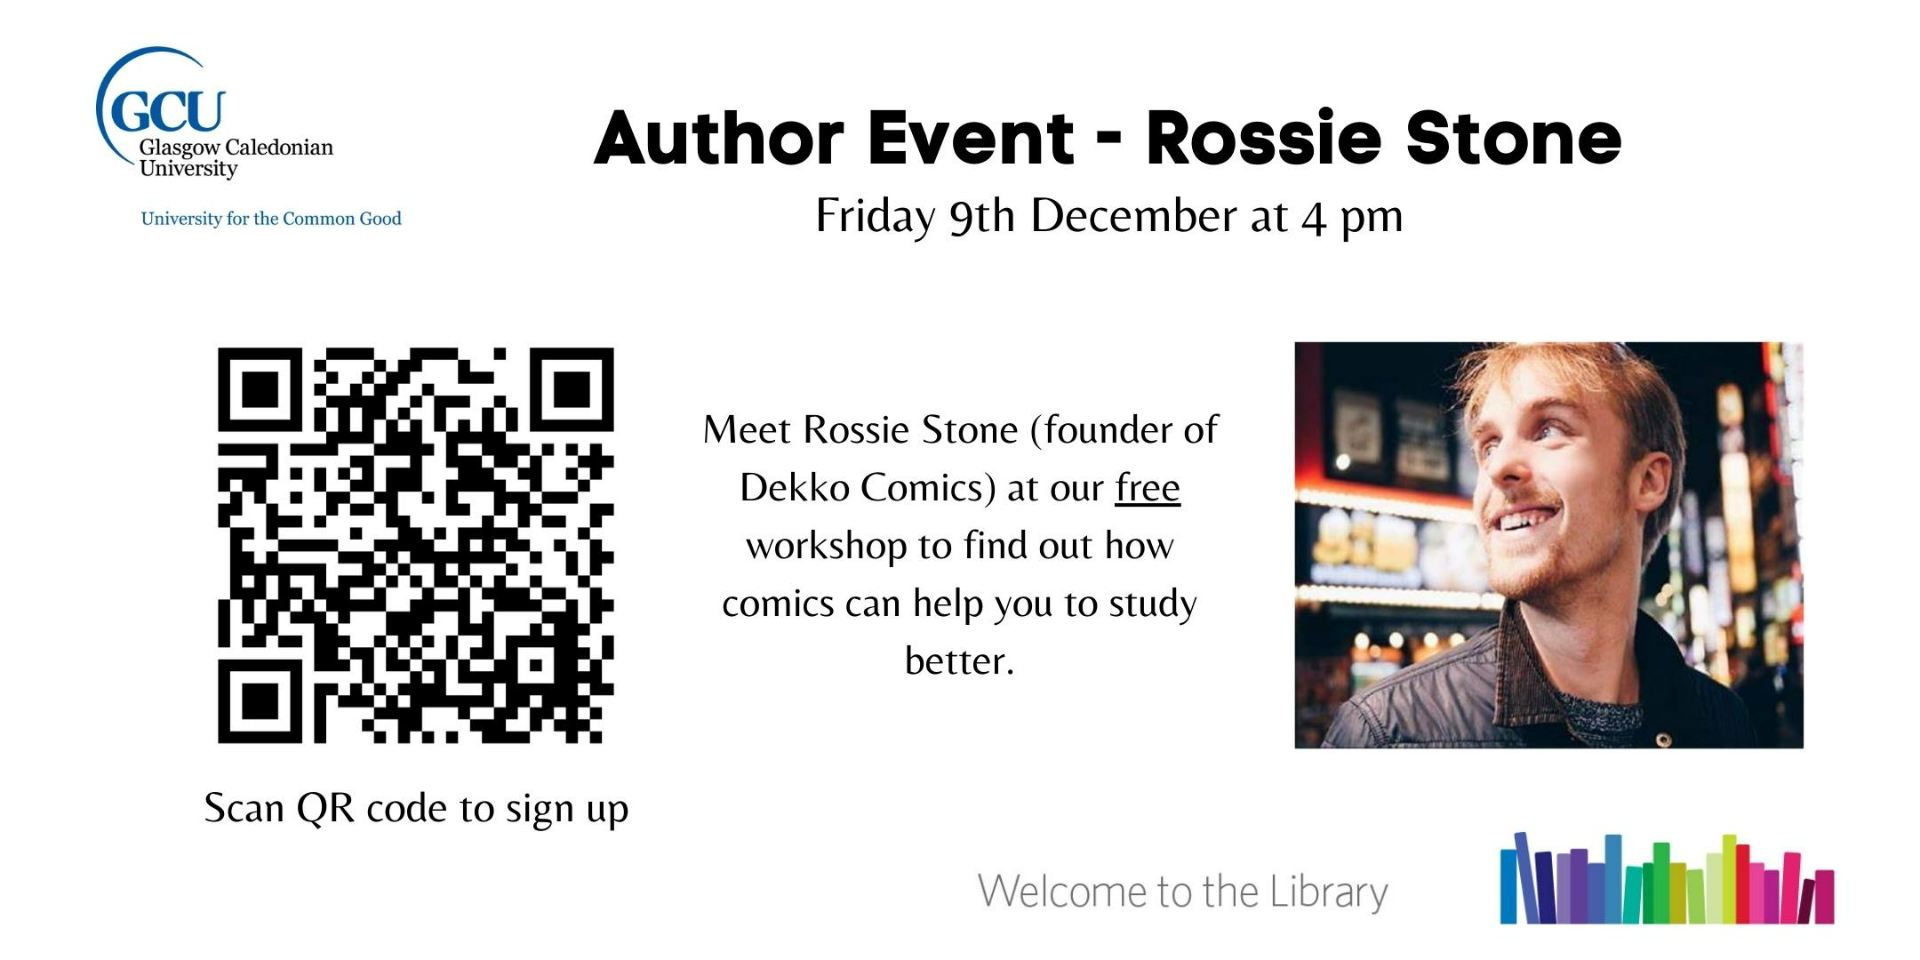 Author event - Rossie Stone QR code to scan to sign up, picture of the author and caption stating: Meet Rossie Stone (founder of Dekko comics) at our free workshop to find out how comics can help you to study better.